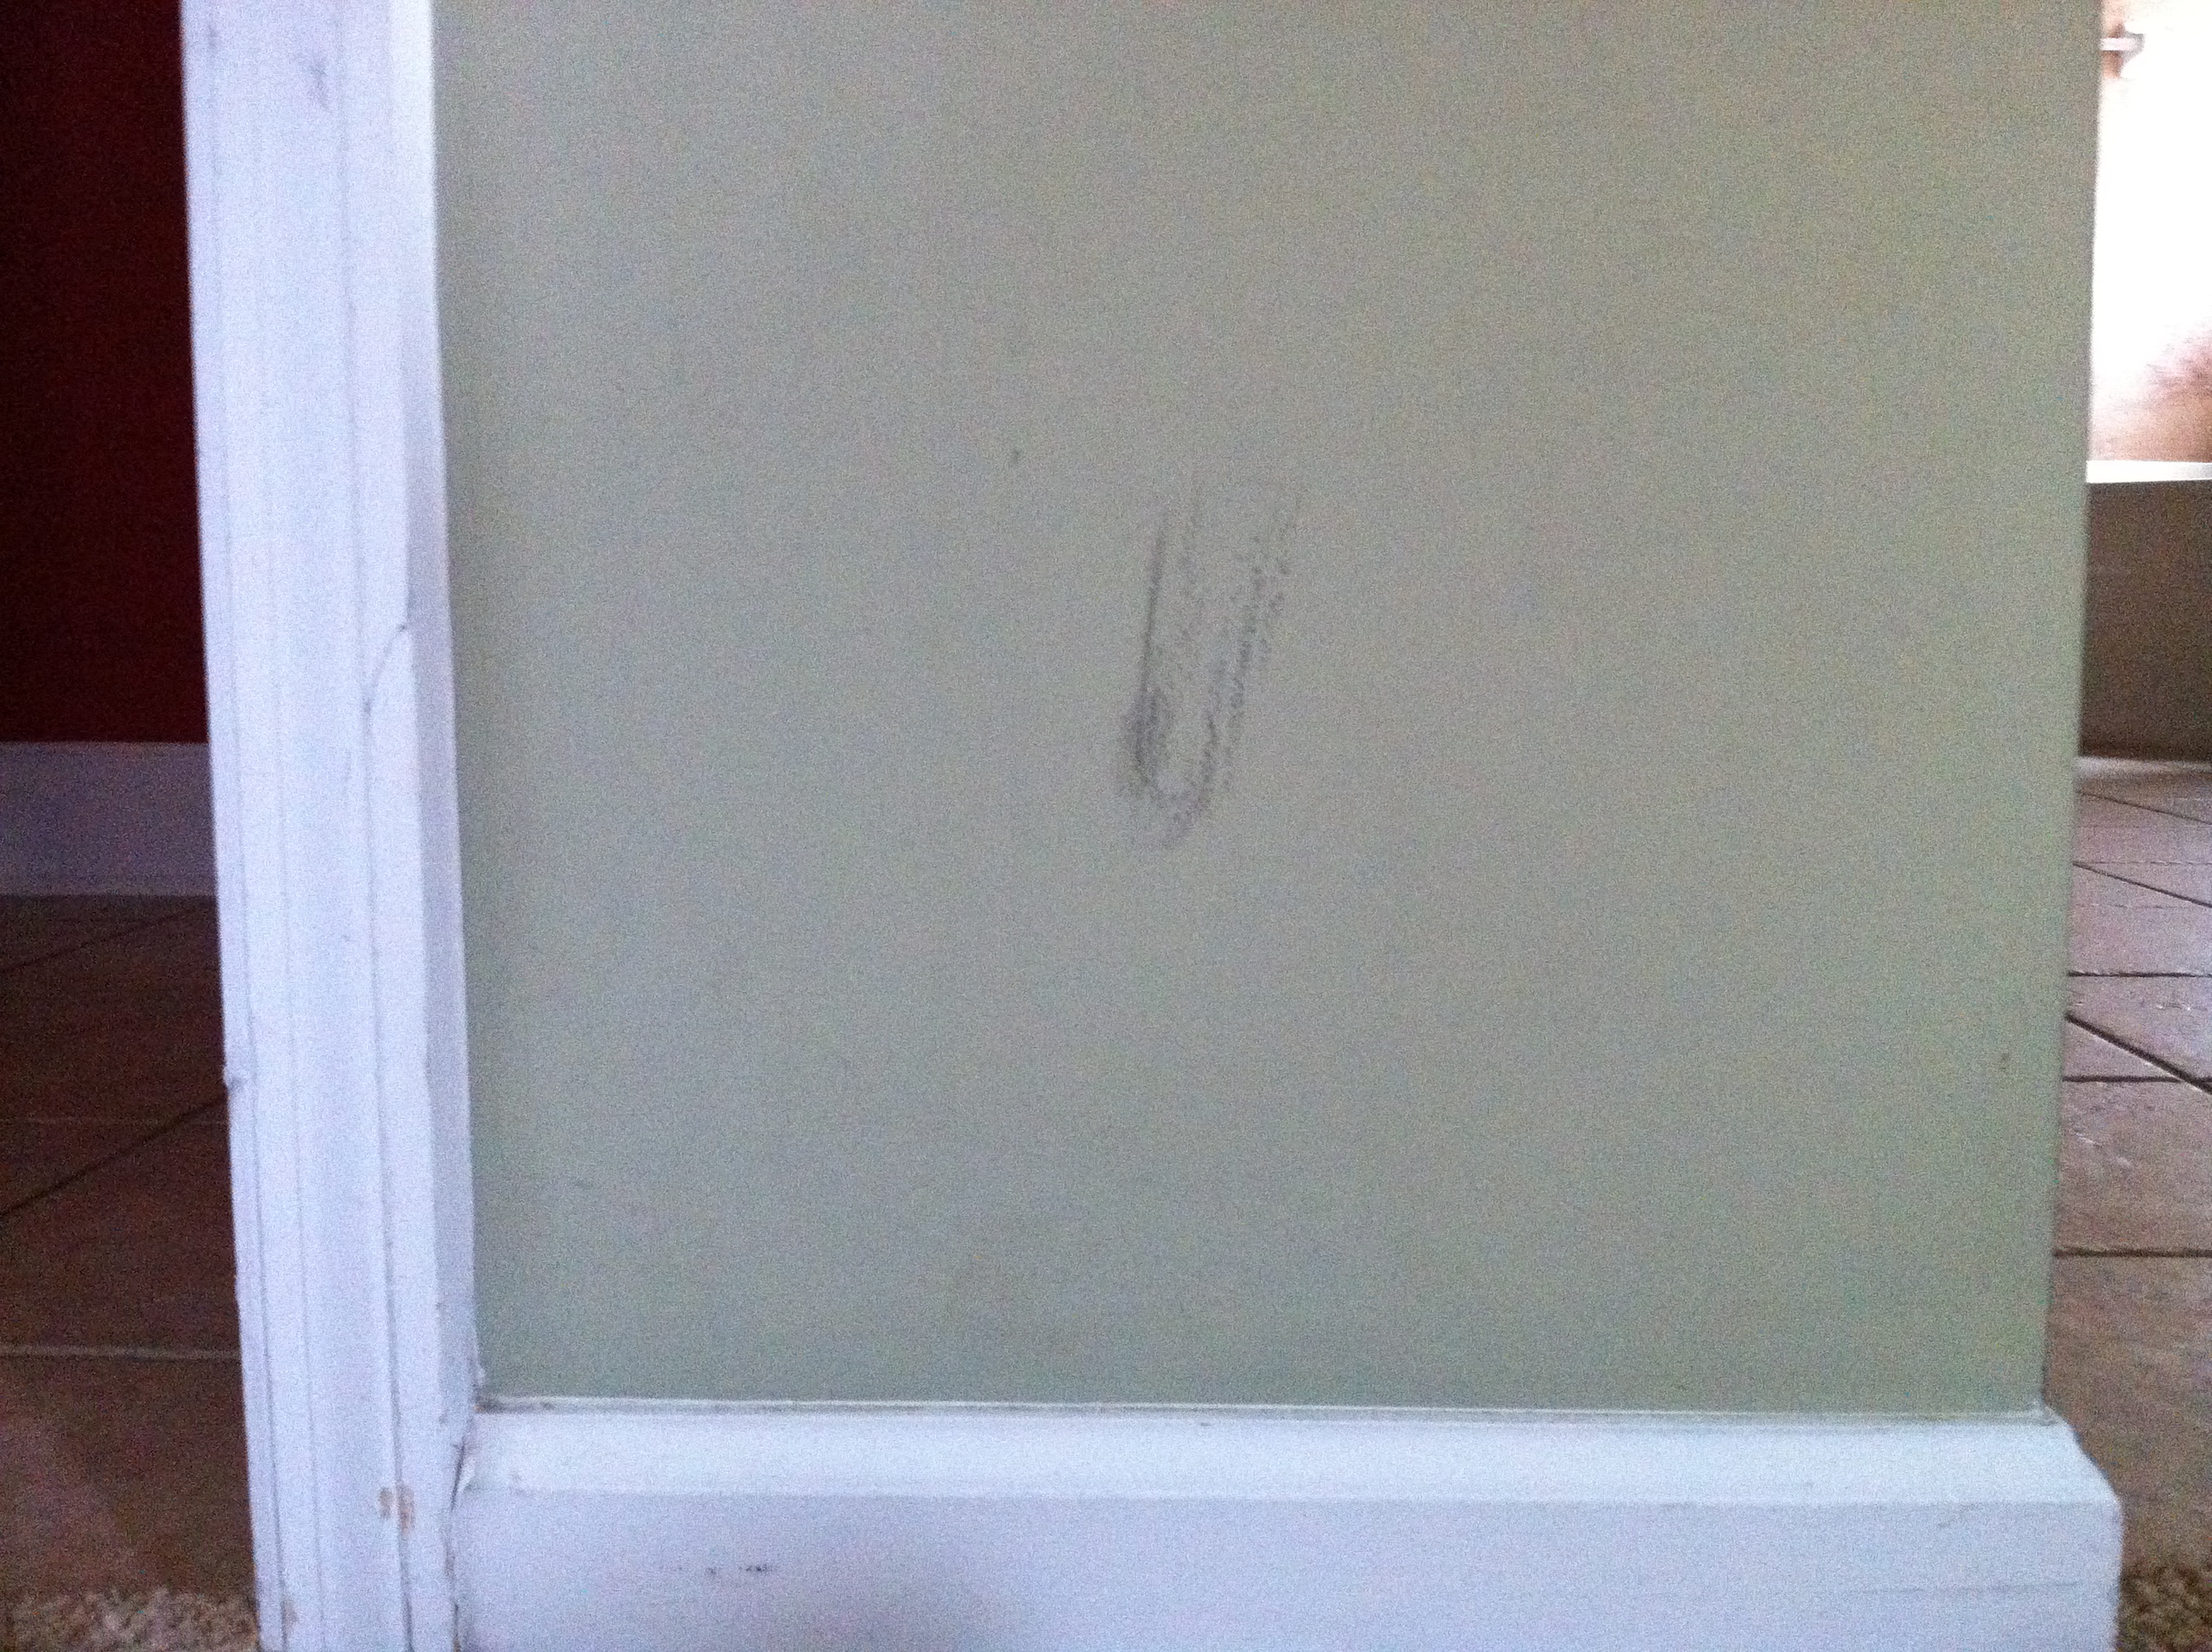 marks on wall